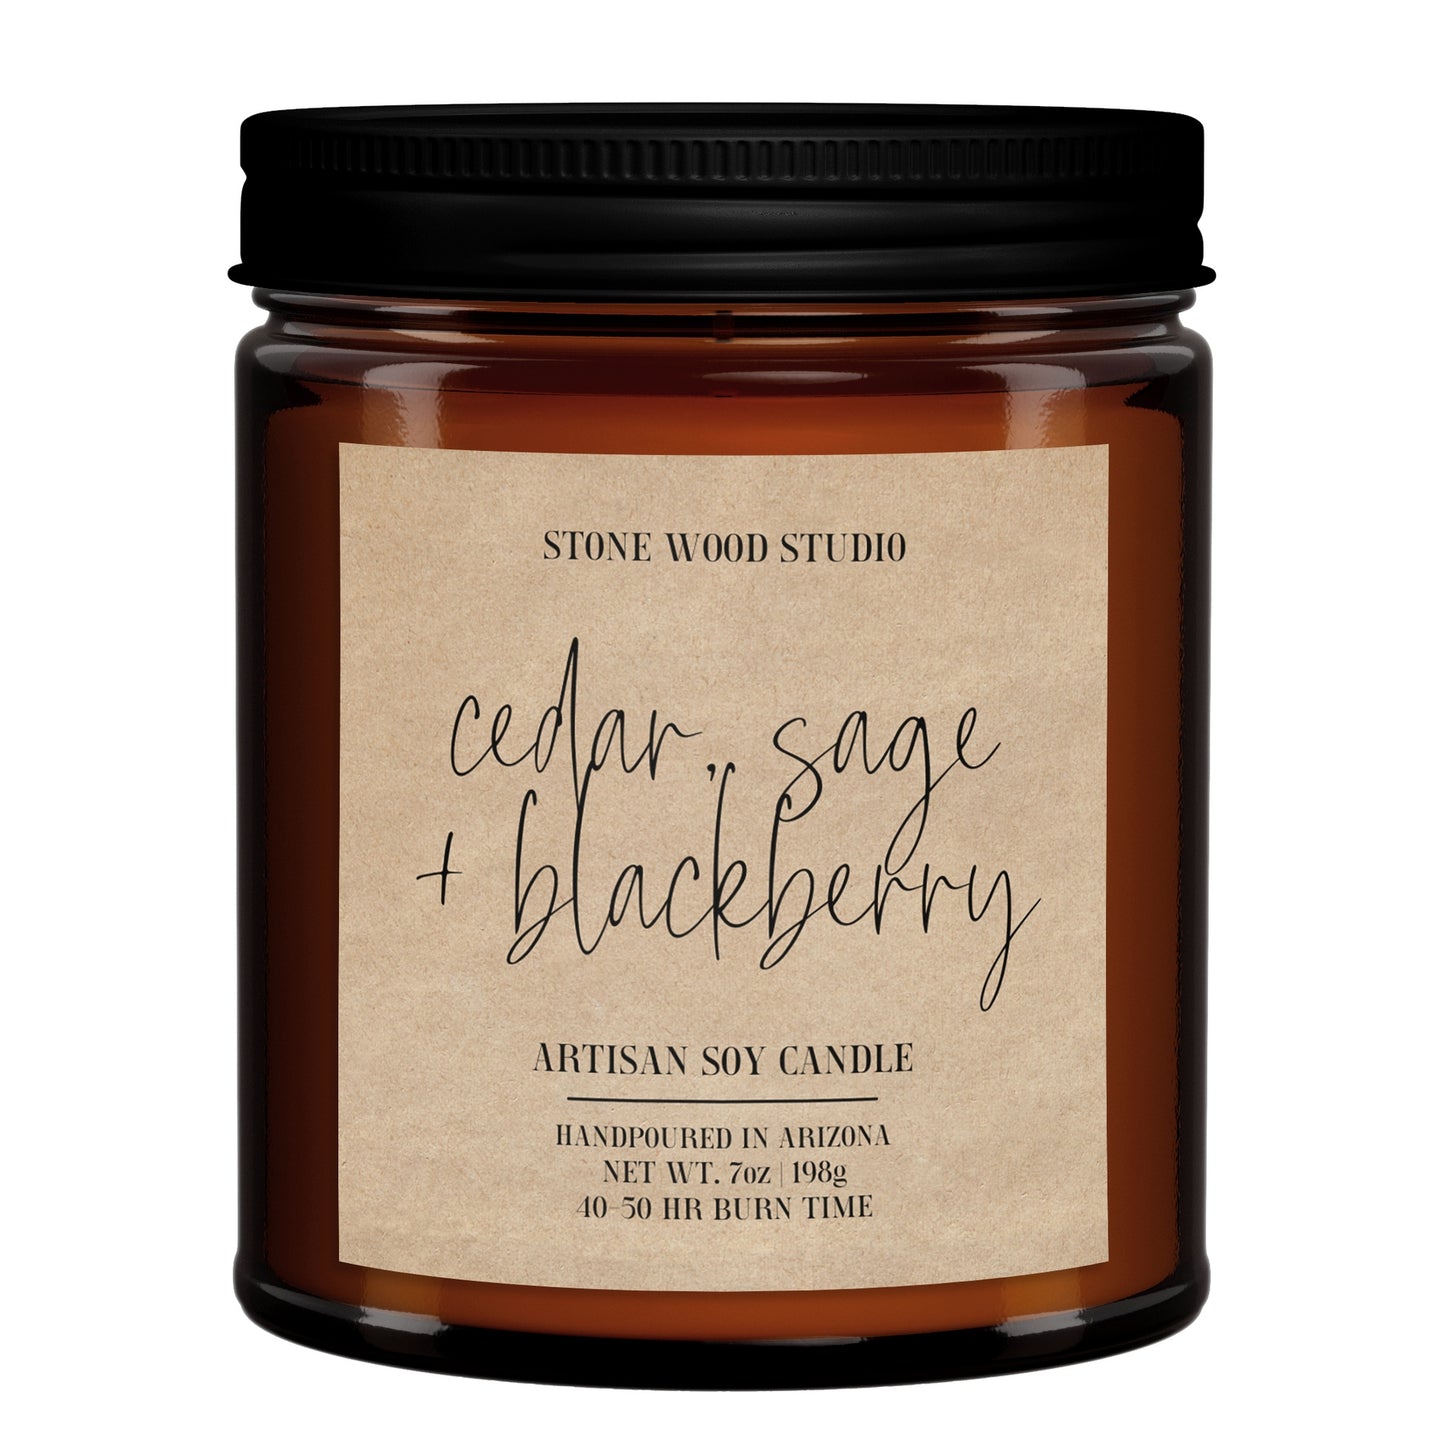 Cedar, Sage + Blackberry Hand Poured Soy Candle